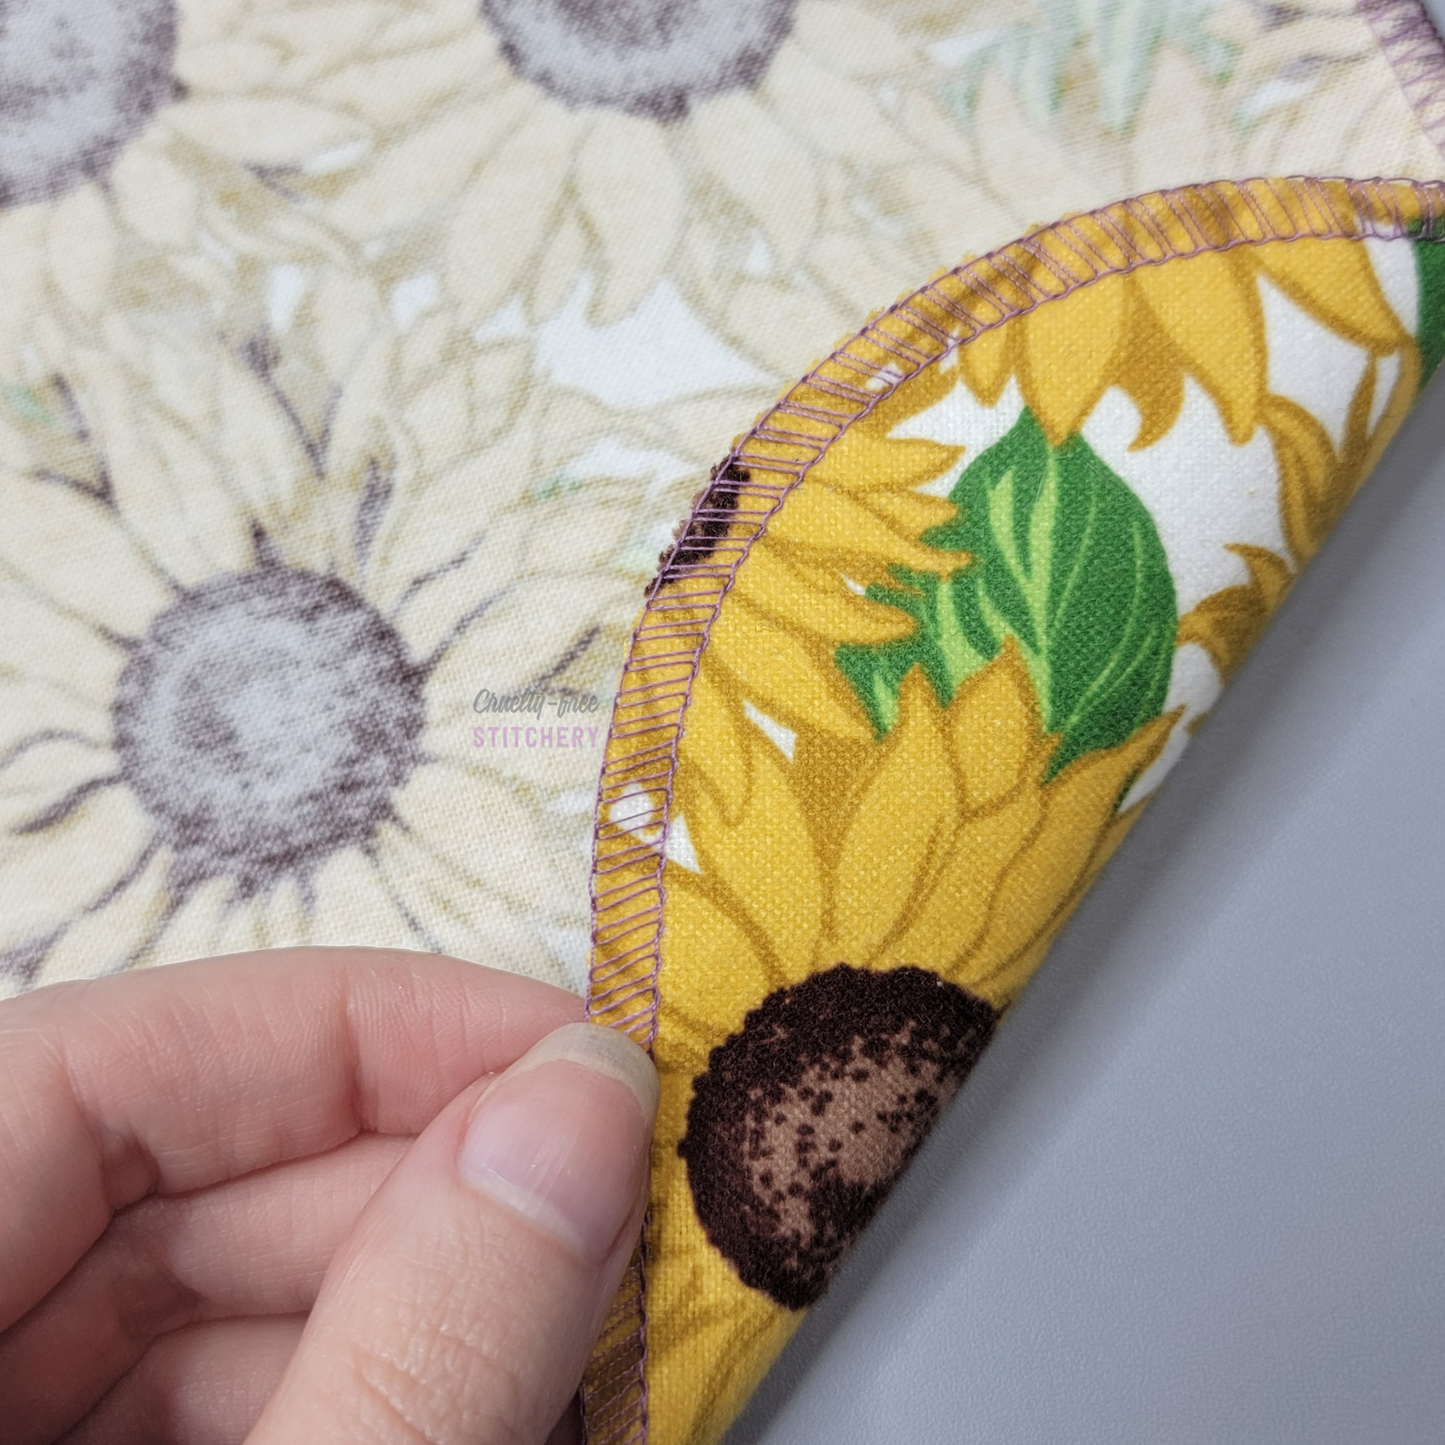 Lifting a corner of the sunflower NonPaper Towel to show the front, back, and a close-up of the stitching.